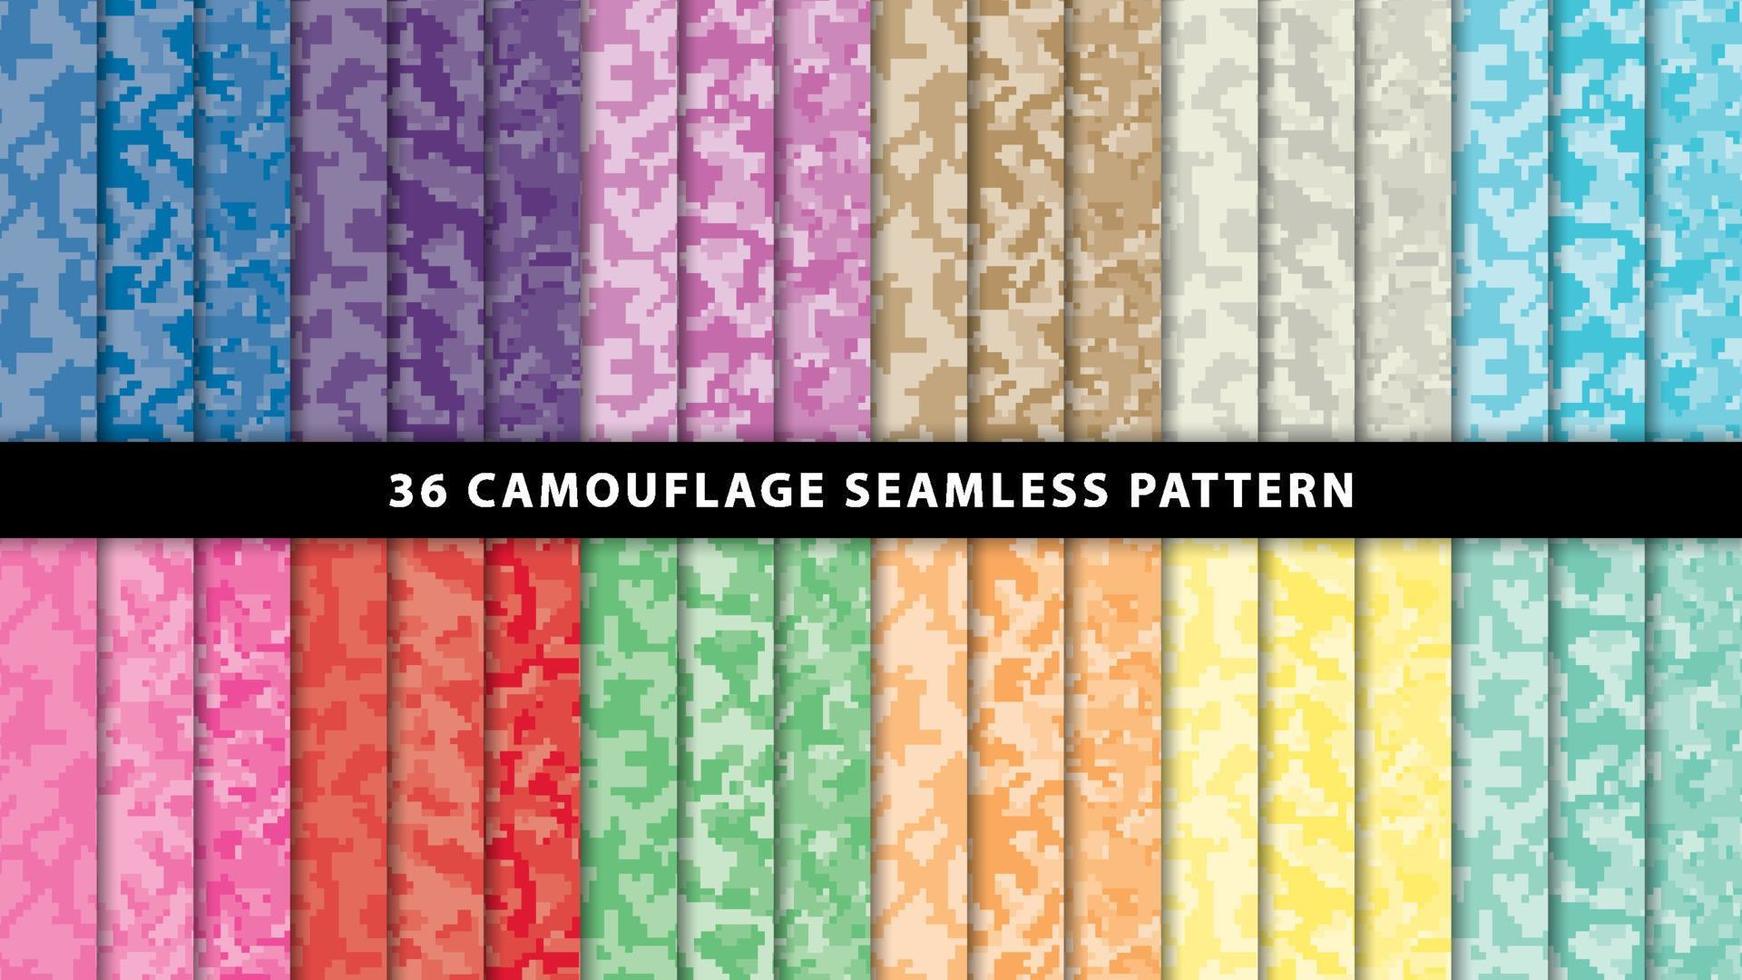 Collection military and army camouflage seamless pattern vector